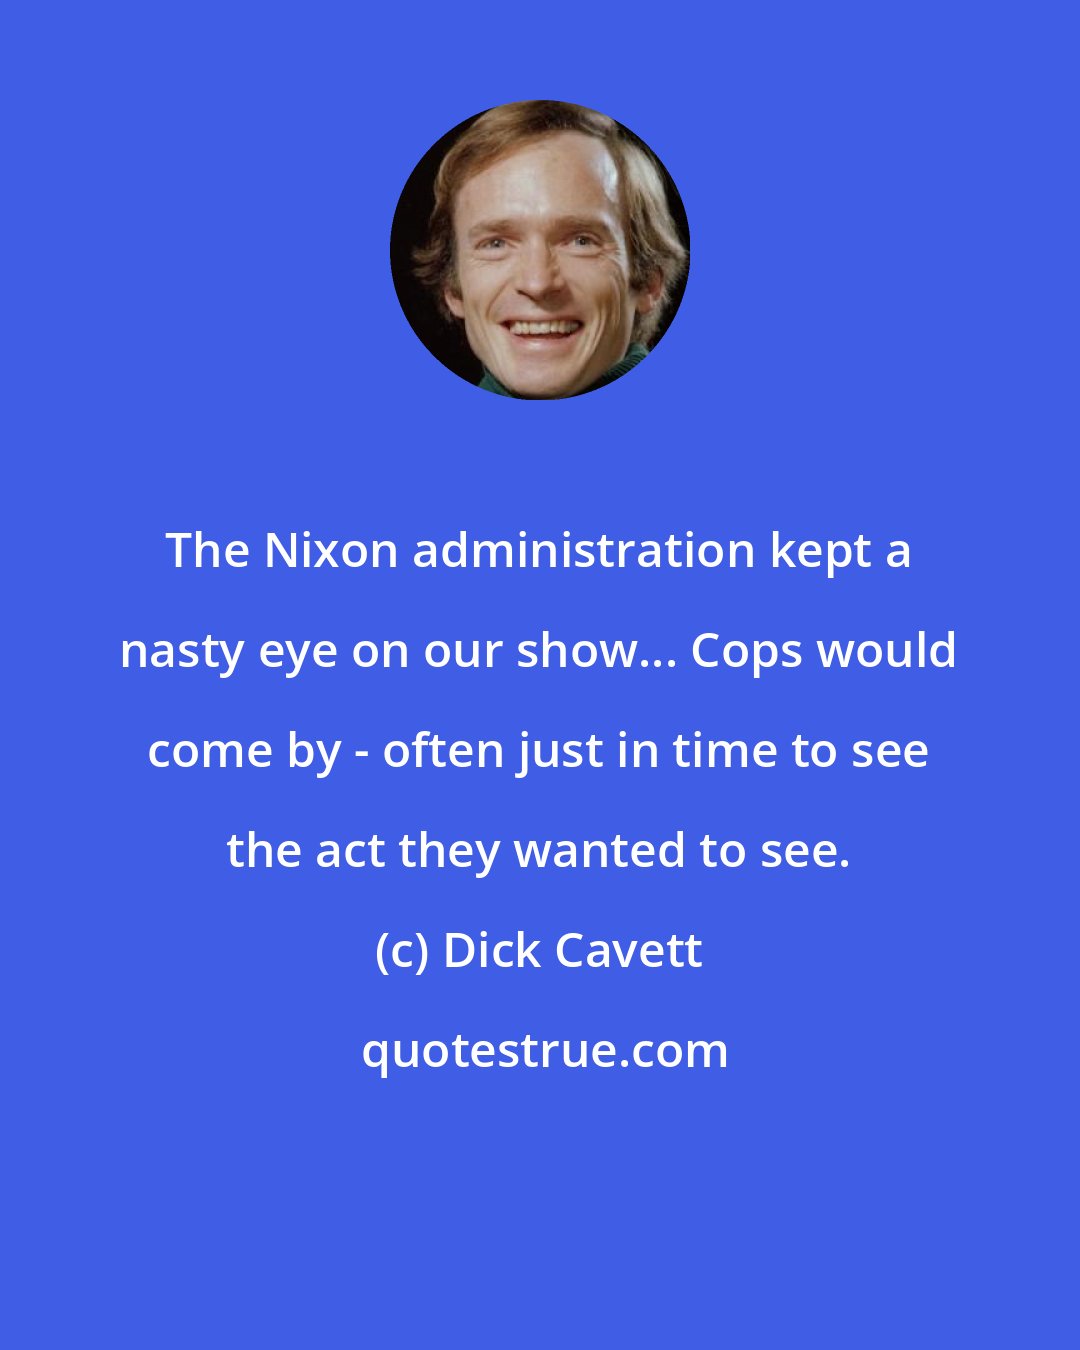 Dick Cavett: The Nixon administration kept a nasty eye on our show... Cops would come by - often just in time to see the act they wanted to see.